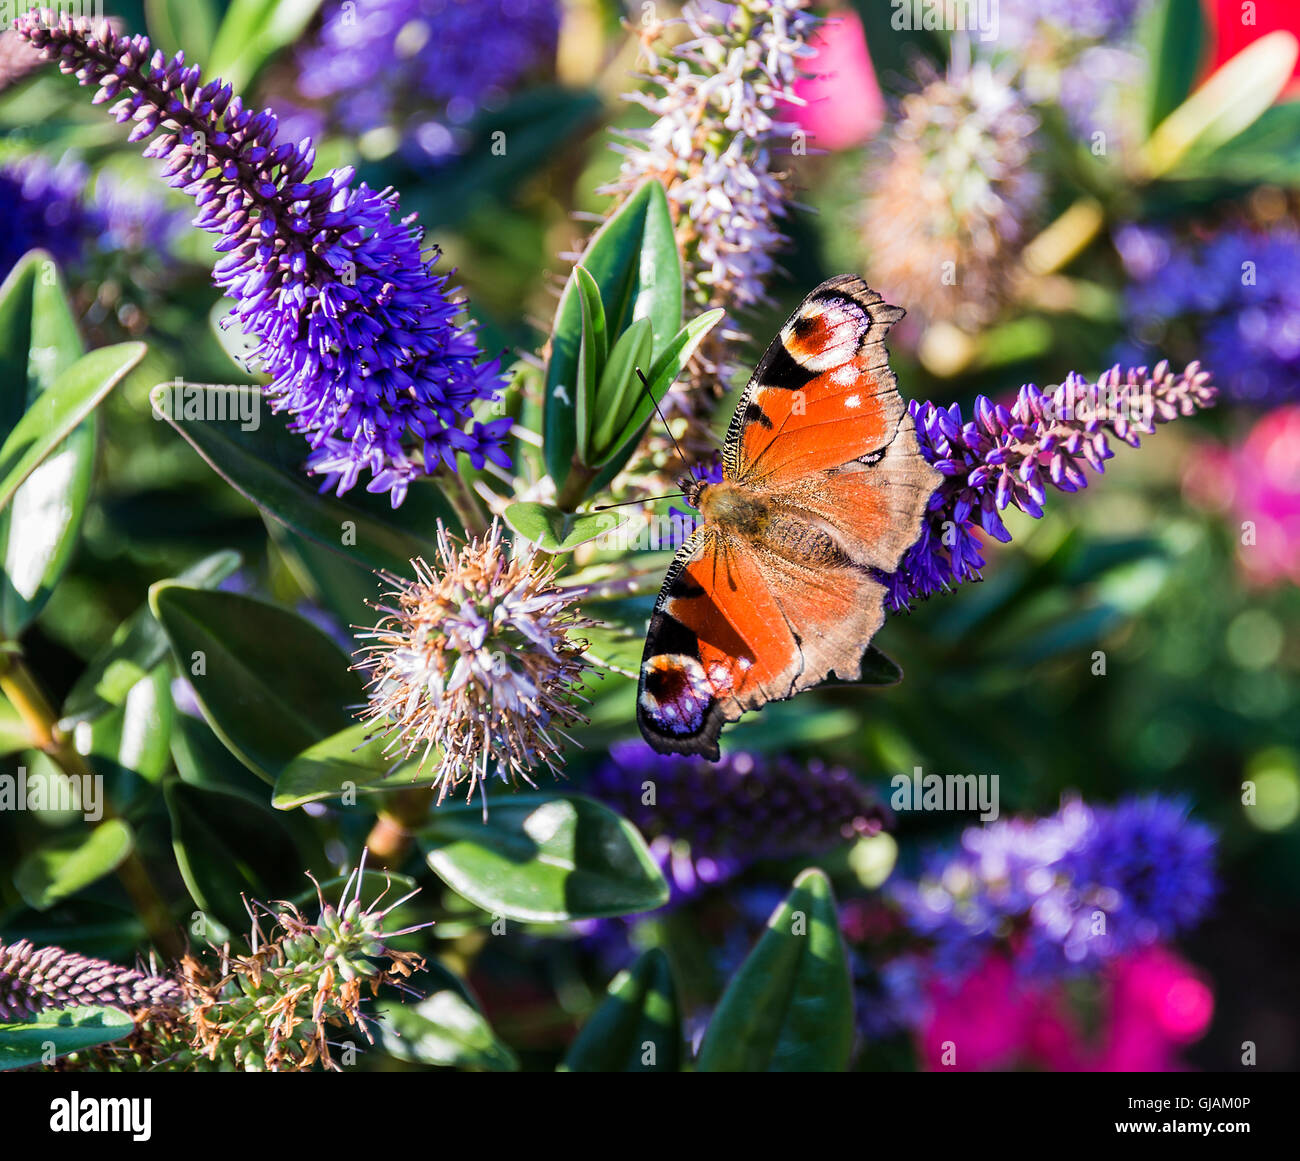 A Beautiful Peacock Butterfly on a Blue Hebe Flower in a Garden at Alsager Cheshire England United Kingdom UK Stock Photo